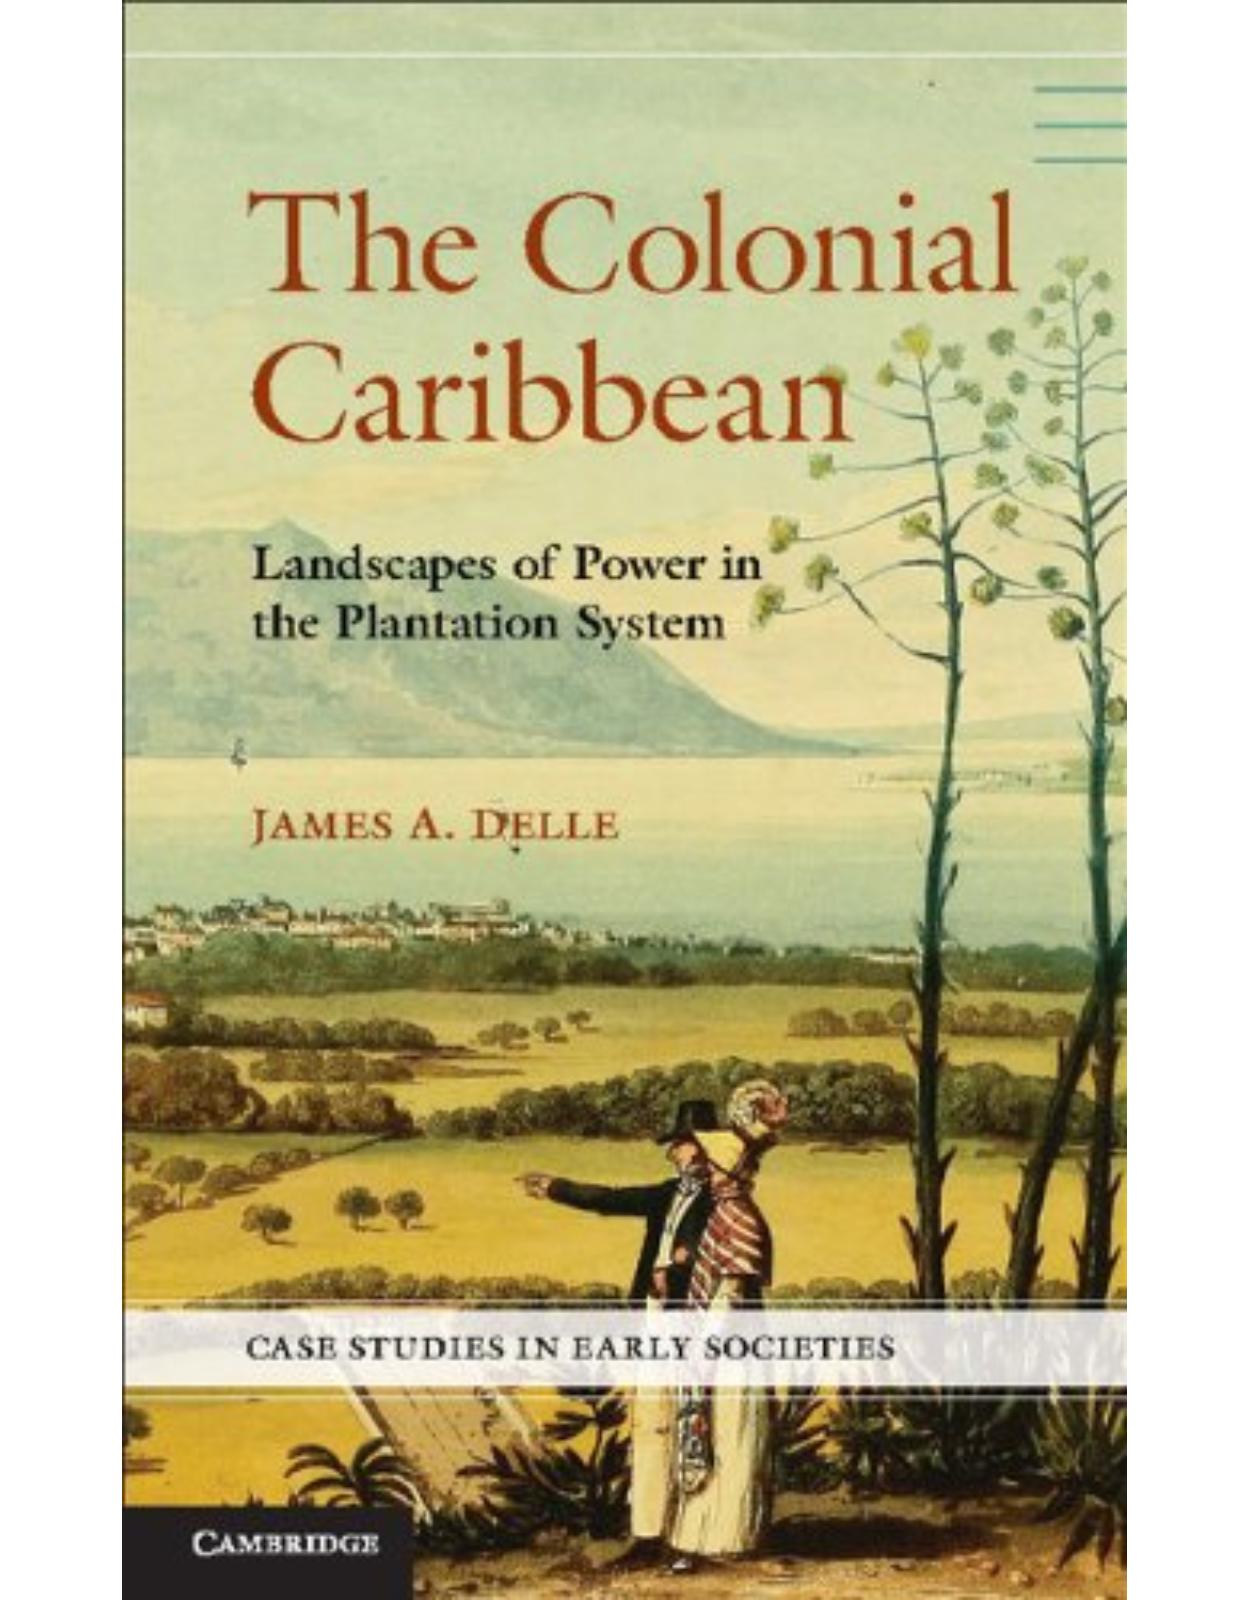 The Colonial Caribbean: Landscapes of Power in Jamaica's Plantation System (Case Studies in Early Societies)